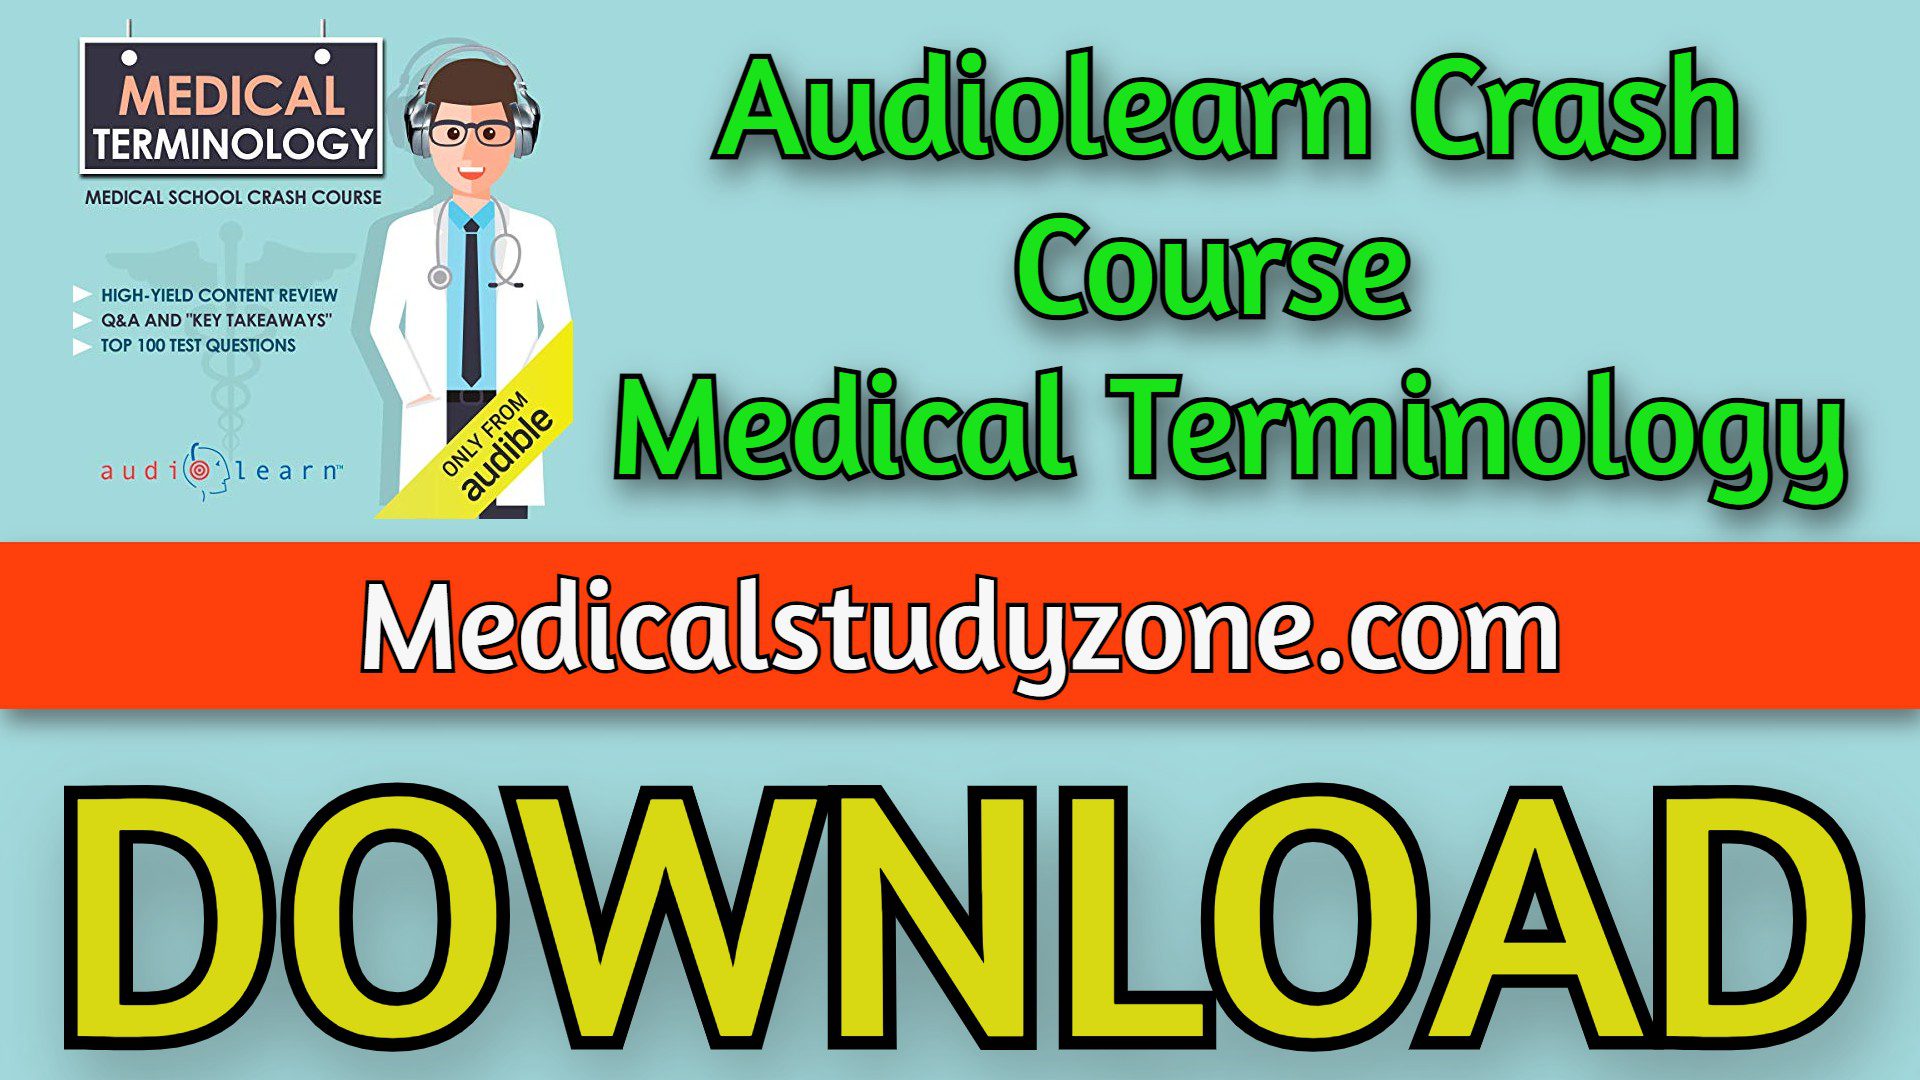 Audiolearn Crash Course Medical Terminology 2021 Free Download